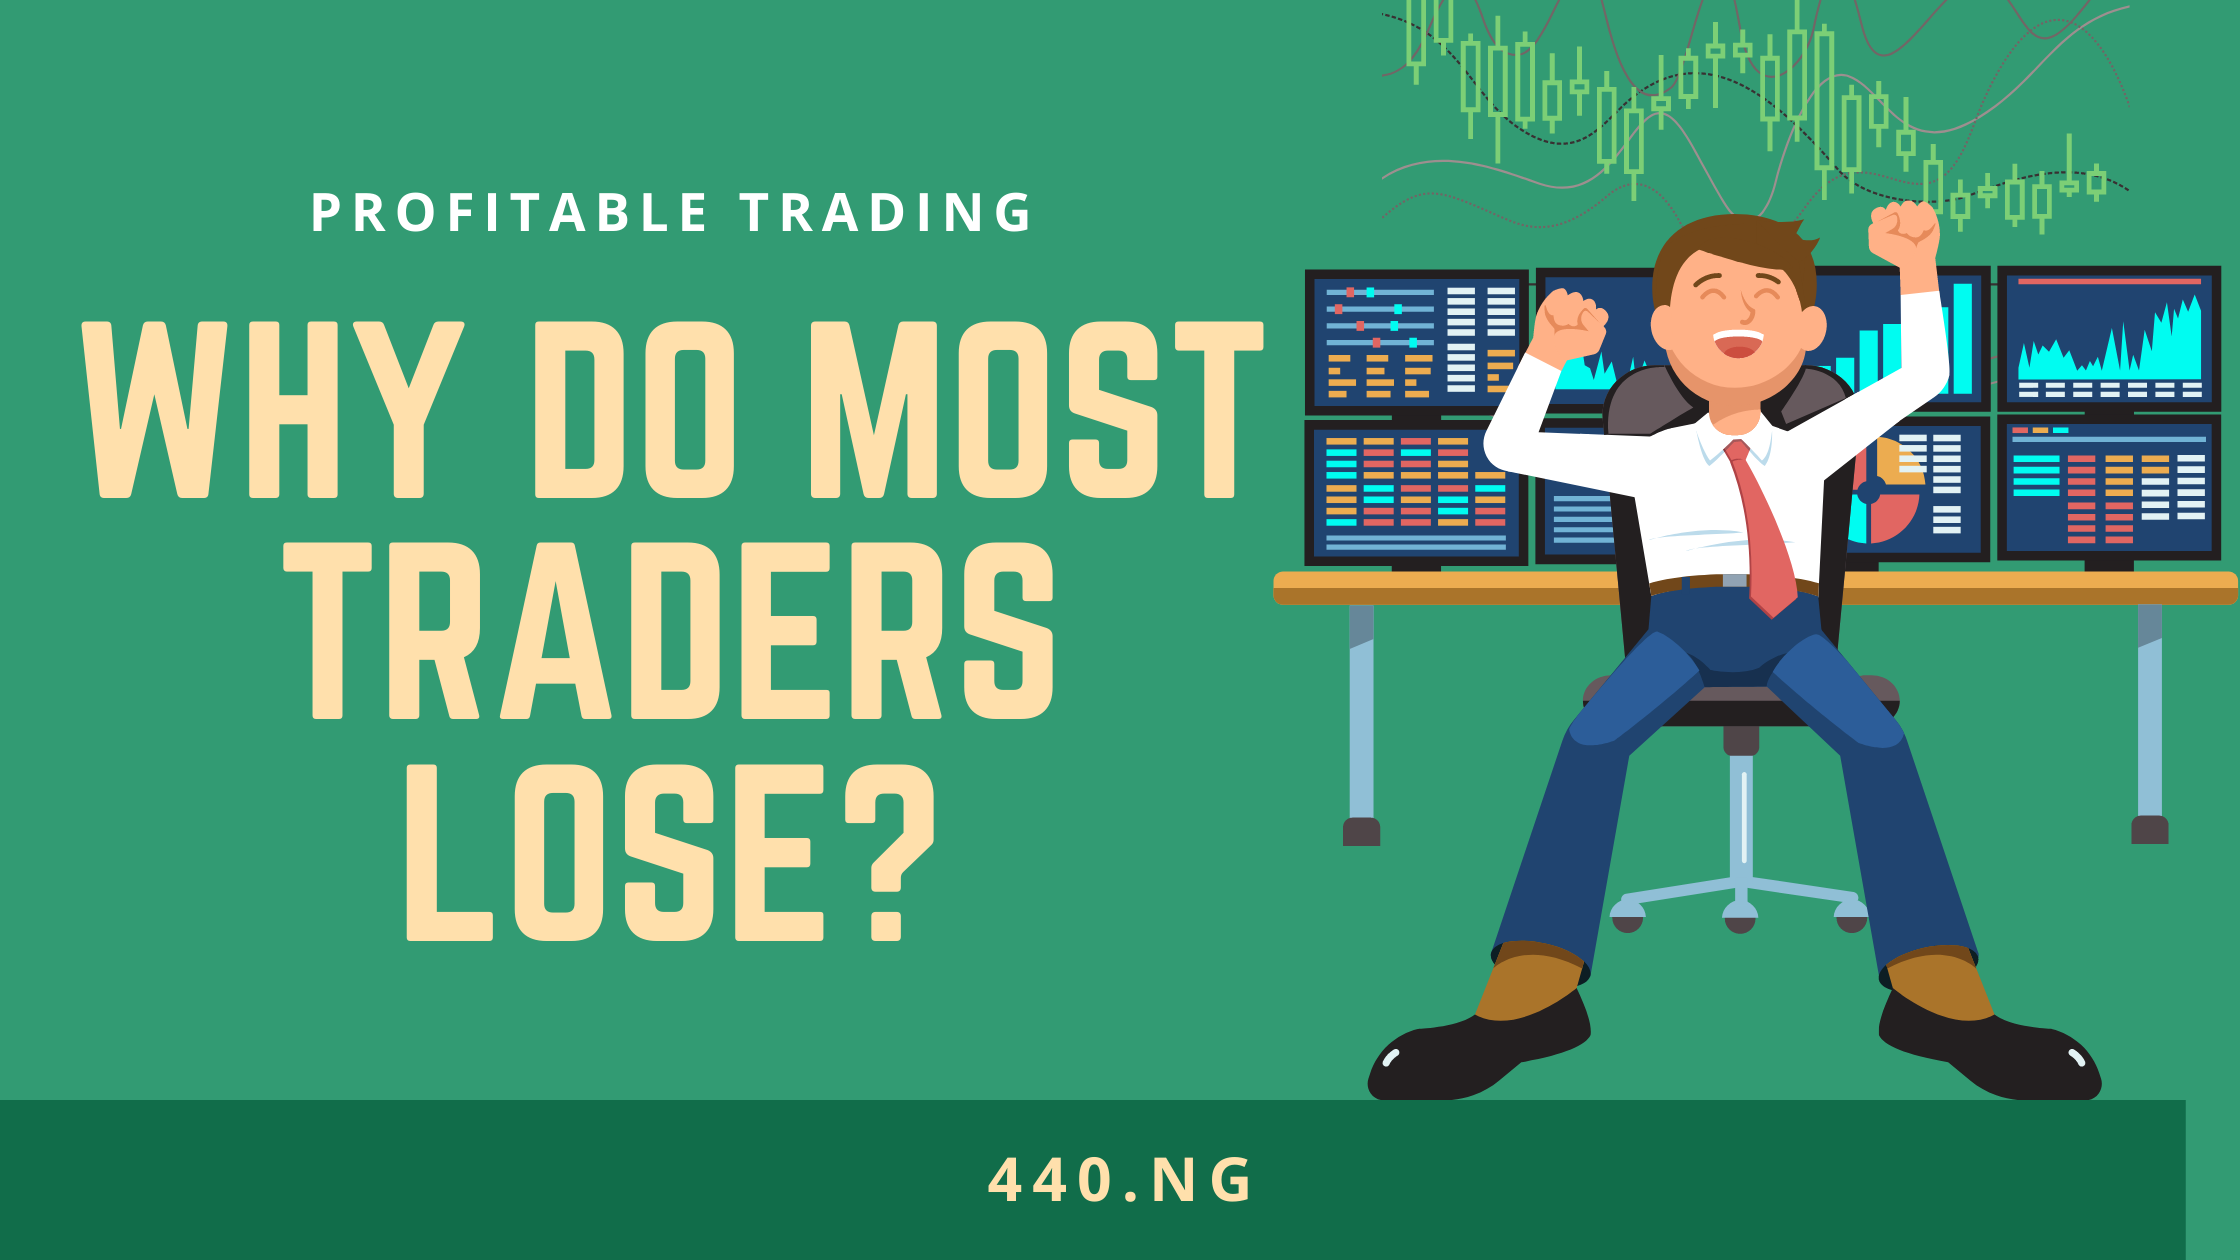 Trading forex in nigeria you are either somebody or nobody forex player forums